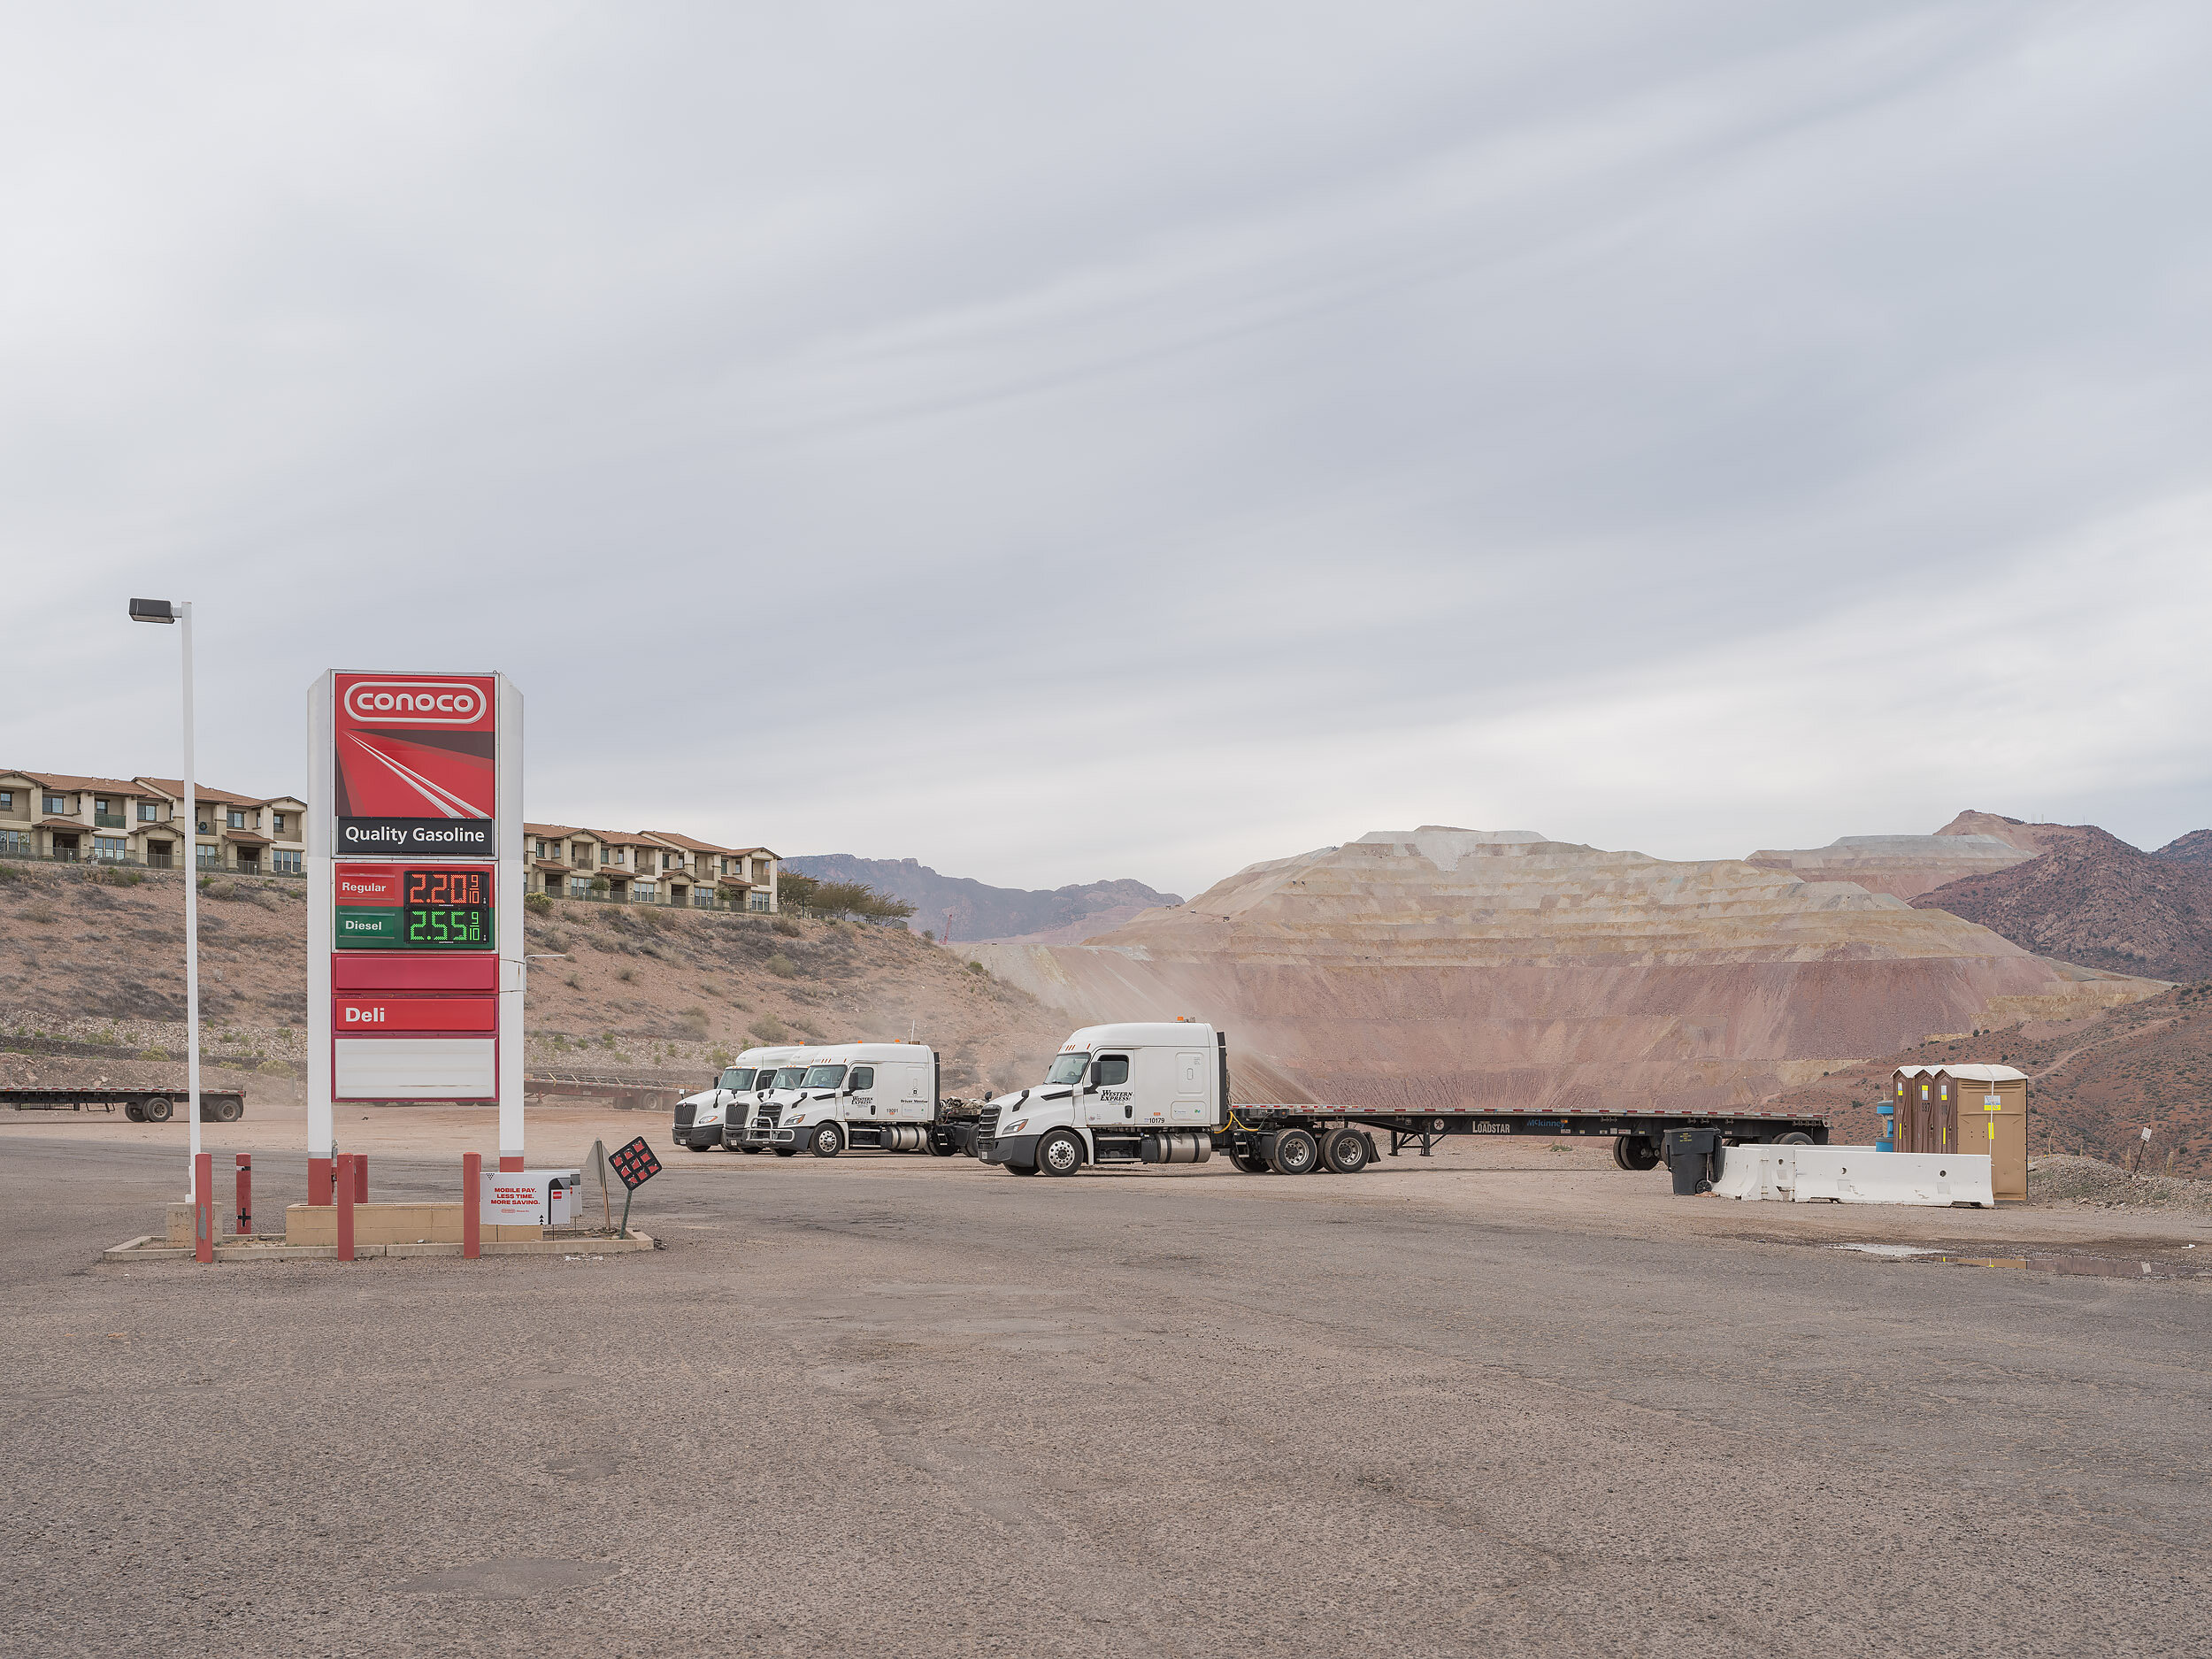 The Morenci Conoco is operated by Freeport-McMoRan employees. Traveling through Arizona, at the time this was the lowest observed fuel price in the state, suggesting a Freeport McMoRan subsidy.